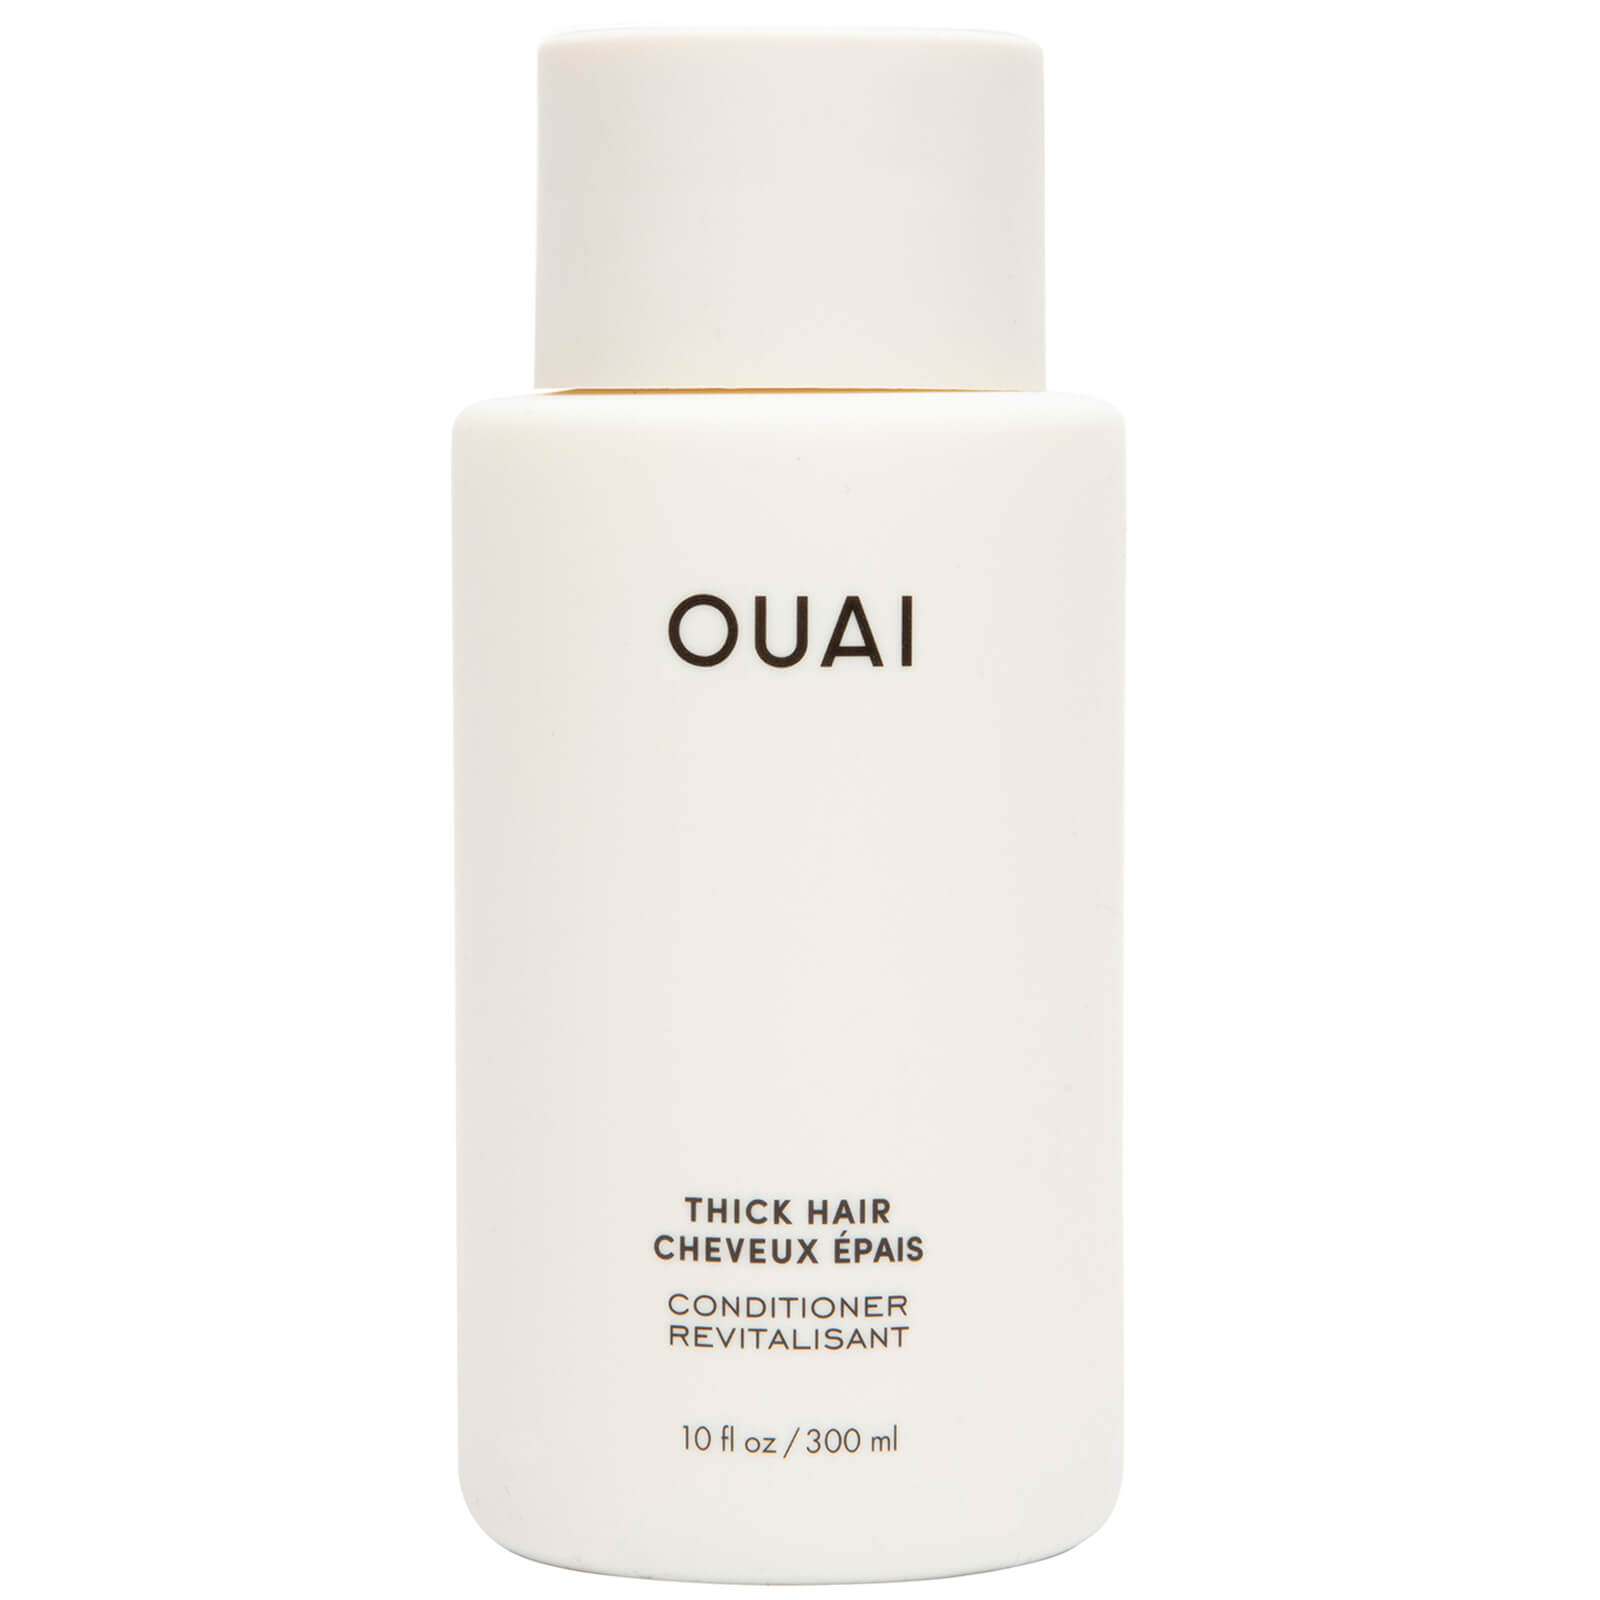 OUAI Thick Hair Conditioner 300ml product